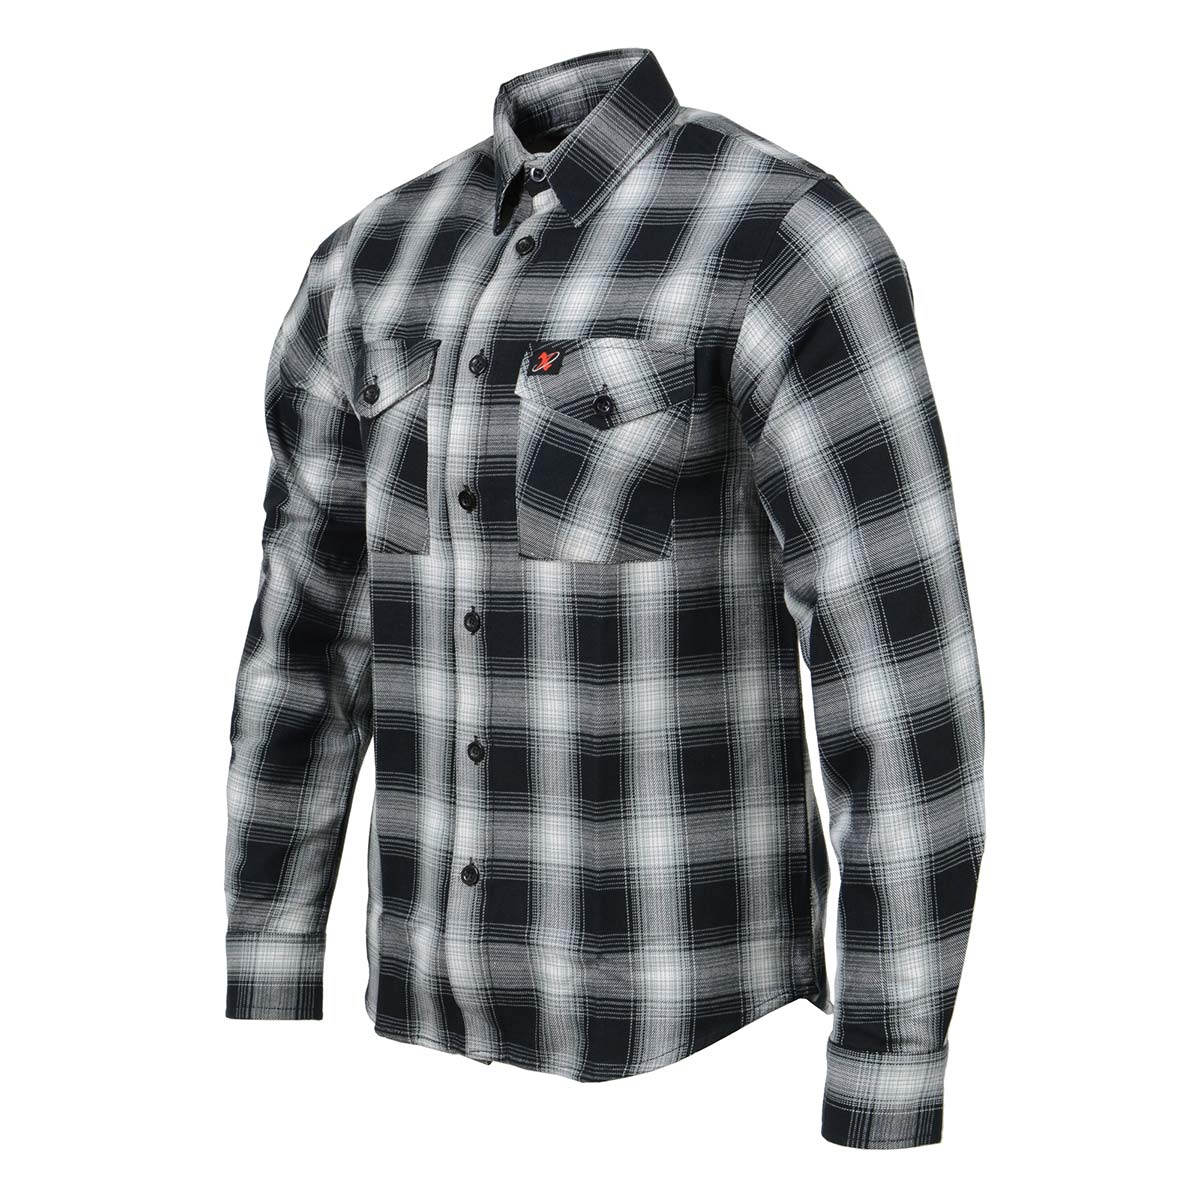 Men's Black and White Long Sleeve Cotton Flannel Shirt